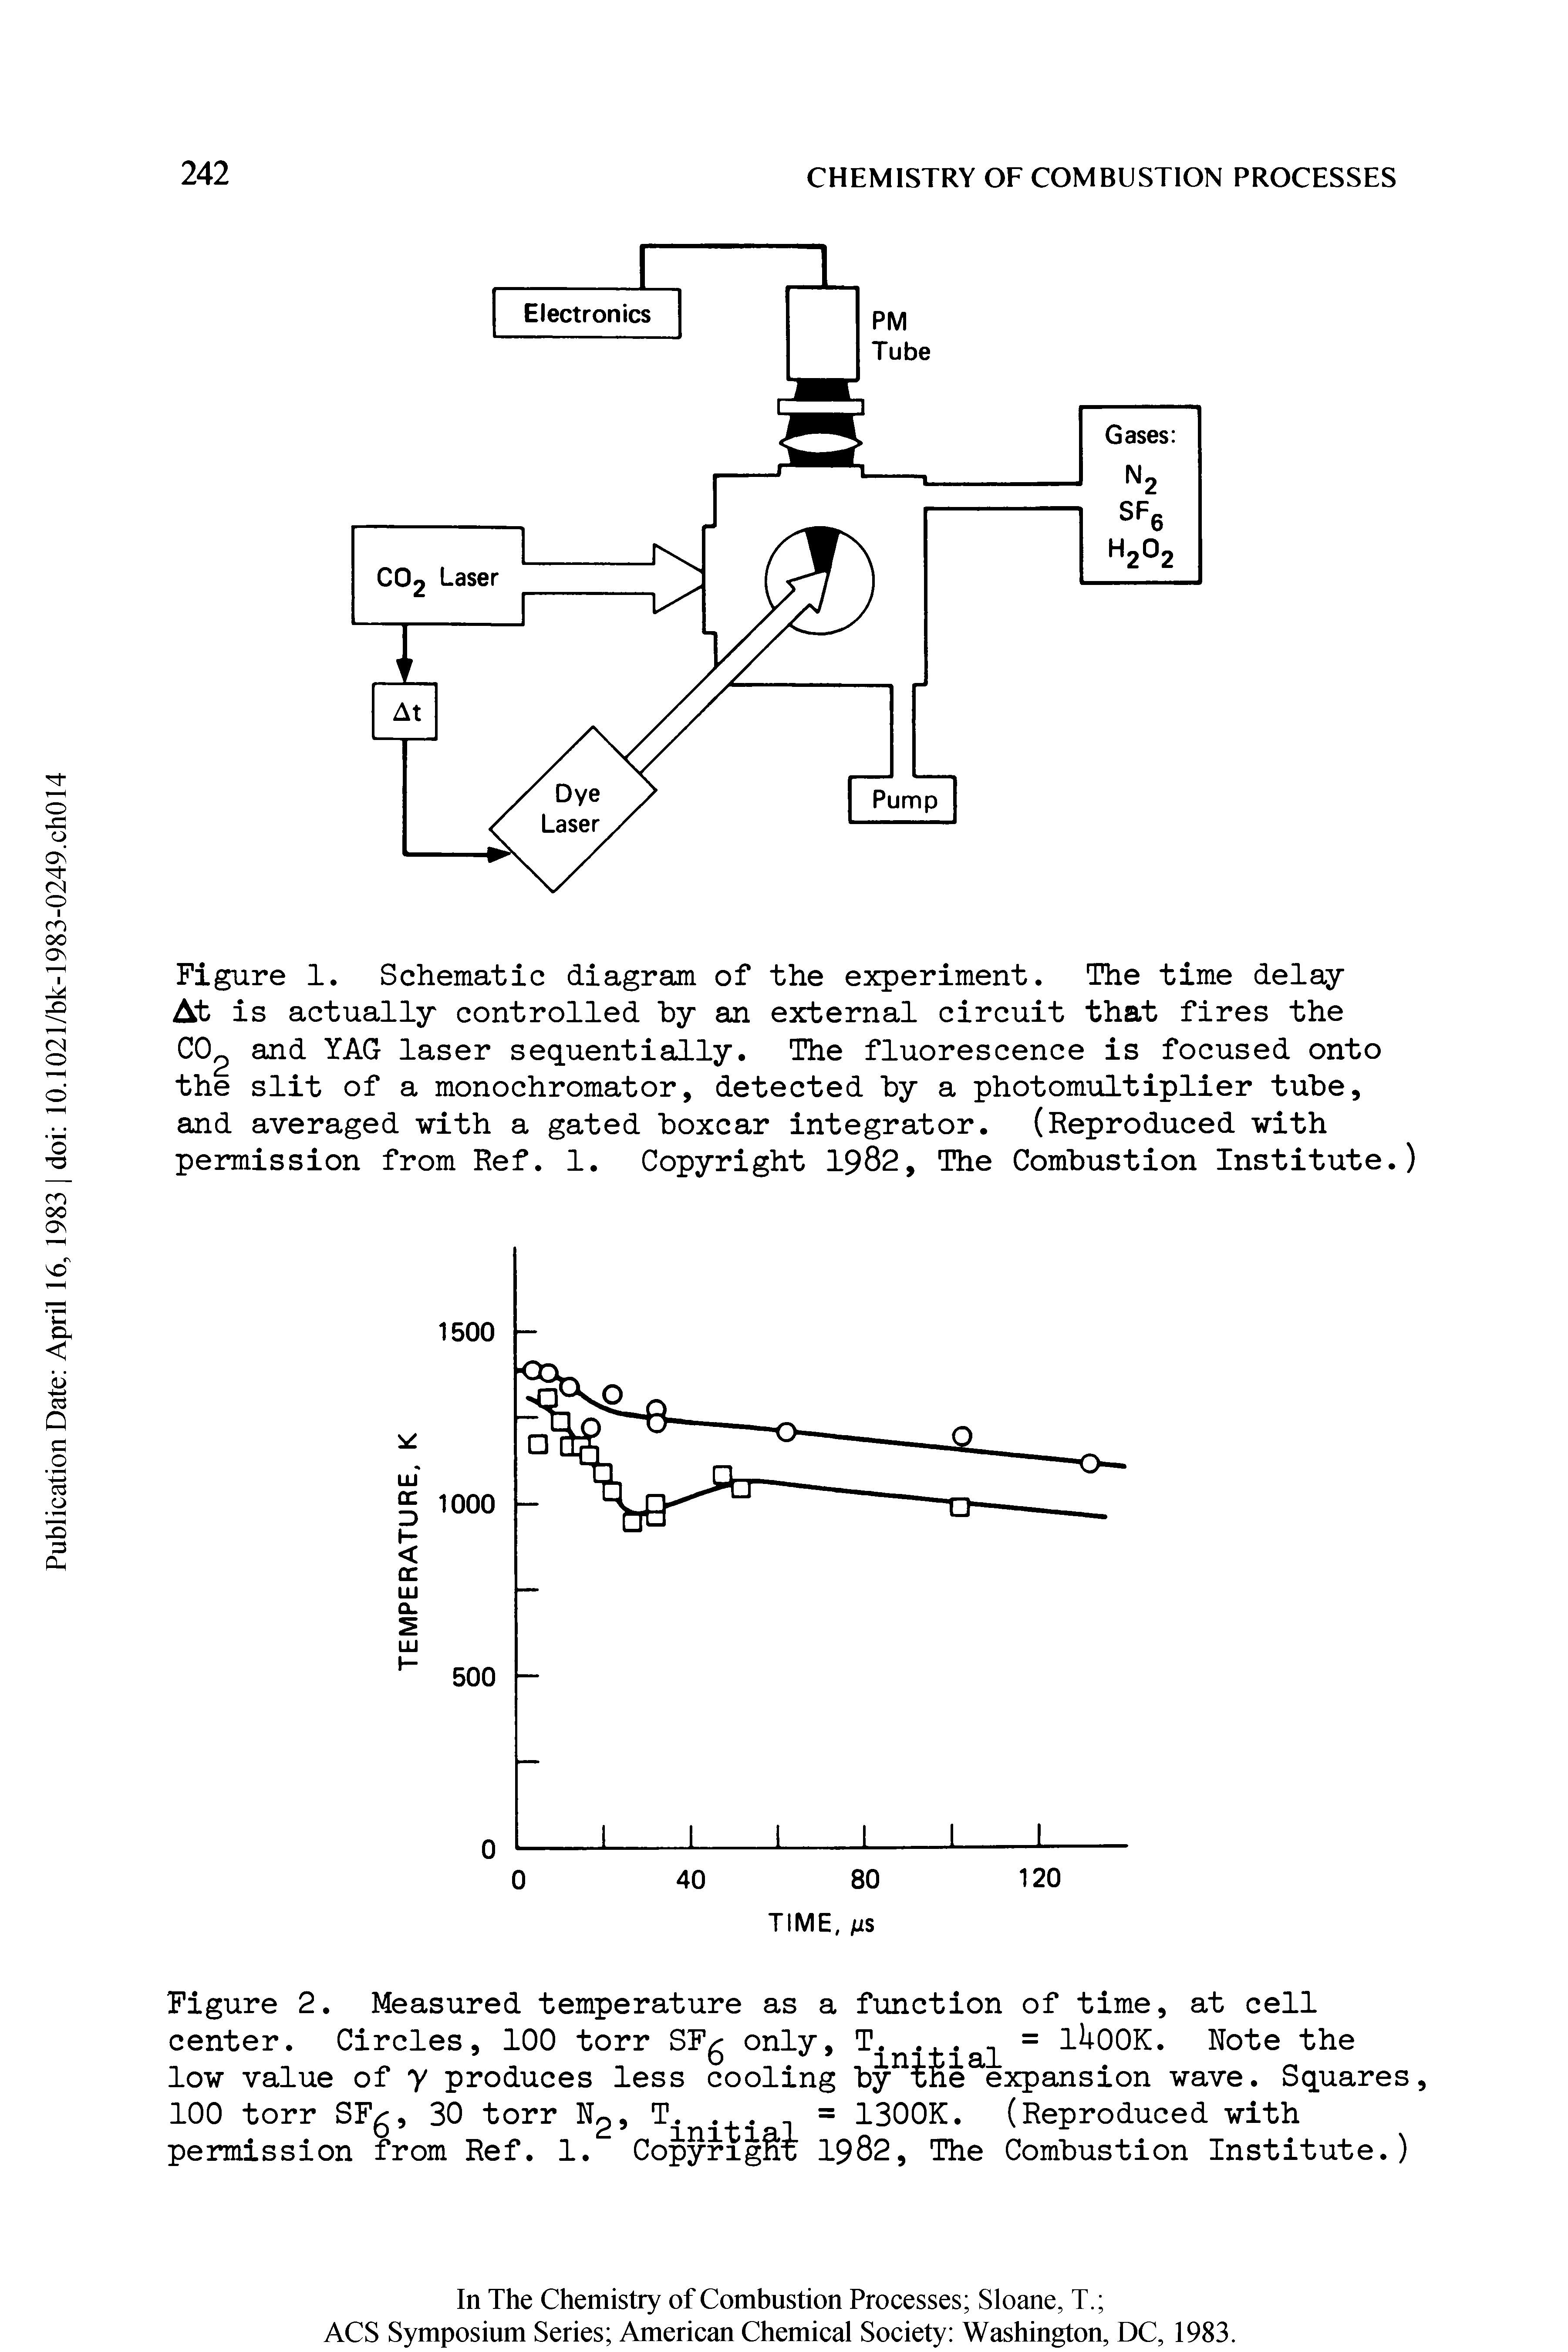 Figure 1. Schematic diagram of the experiment. The time delay At is actually controlled by an external circuit that fires the CO and YAG laser sequentially. The fluorescence is focused onto the slit of a monochromator, detected by a photomultiplier tube, and averaged -with a gated boxcar integrator. (Reproduced with permission from Ref. 1. Copyright 1982, The Combustion Institute.)...